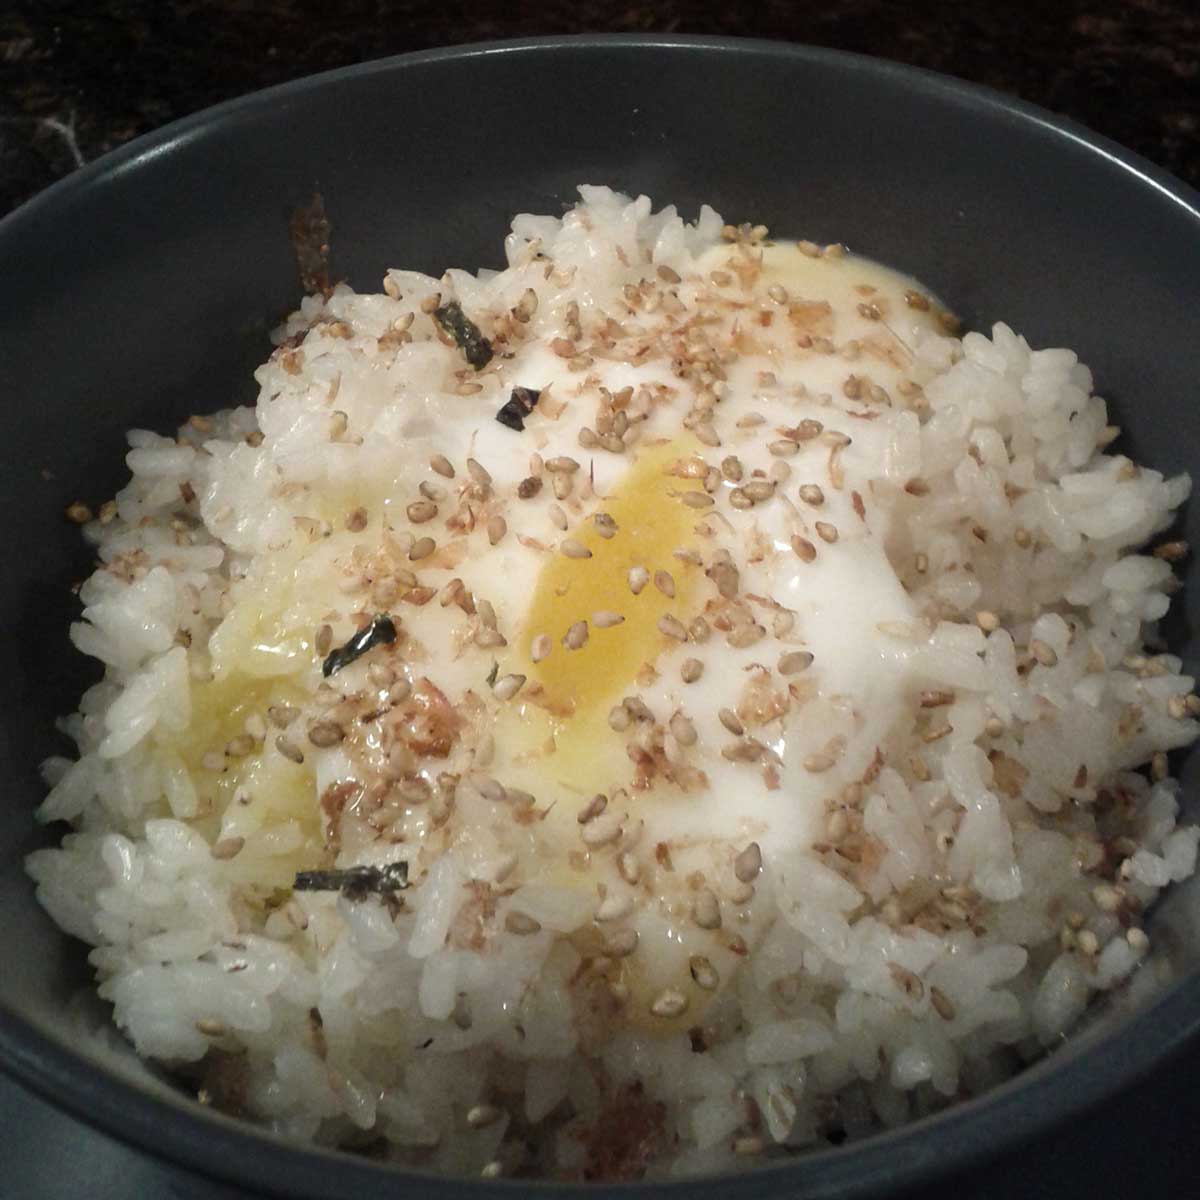 A bowl of rice topped with partially-cooked egg and furikake (Japanese condiment).